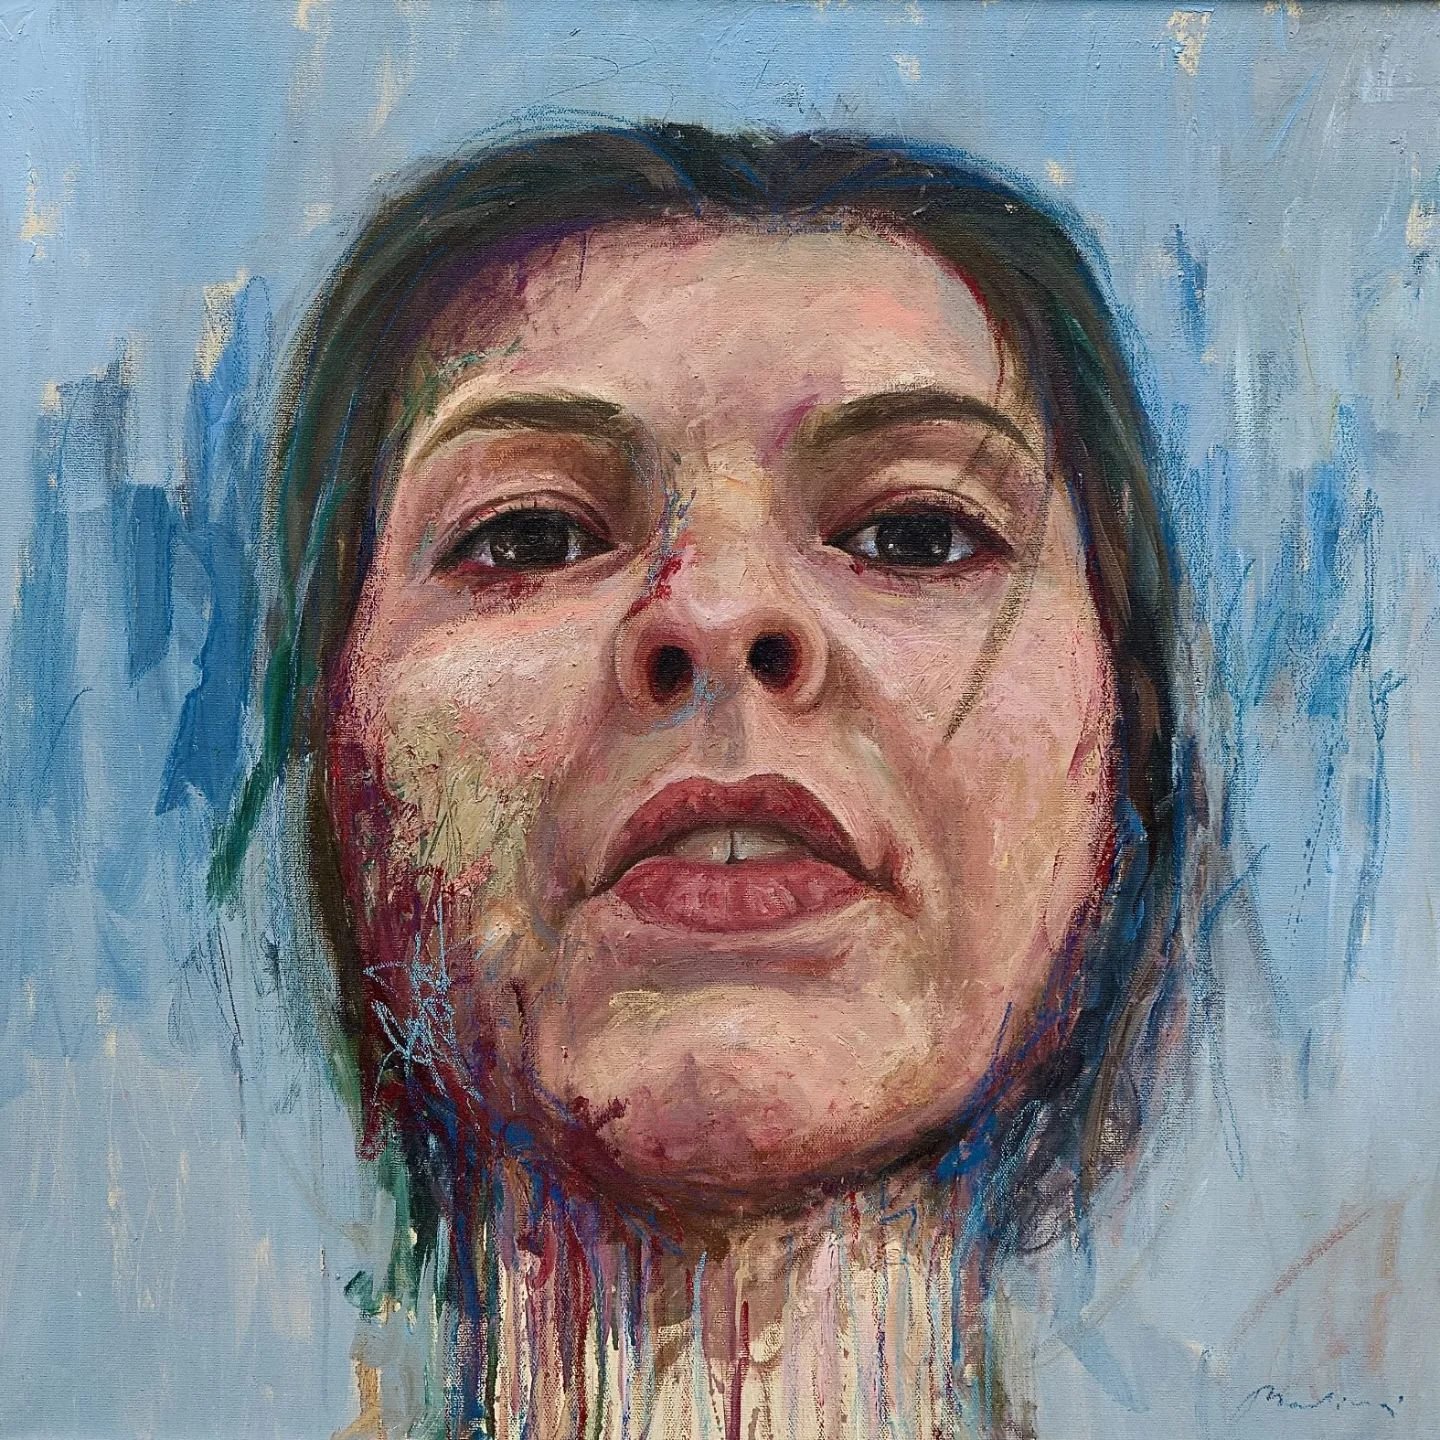 #MeetTheArtist 
@martina__spasovska 

Oil on canvas with oil pastels
80x80cm
FOR SALE

Martina Spasovska (b.1997), she is a young visual artist based in Skopje, North Macedonia. She graduated from the Faculty of Fine Arts , majoring in painting. She 